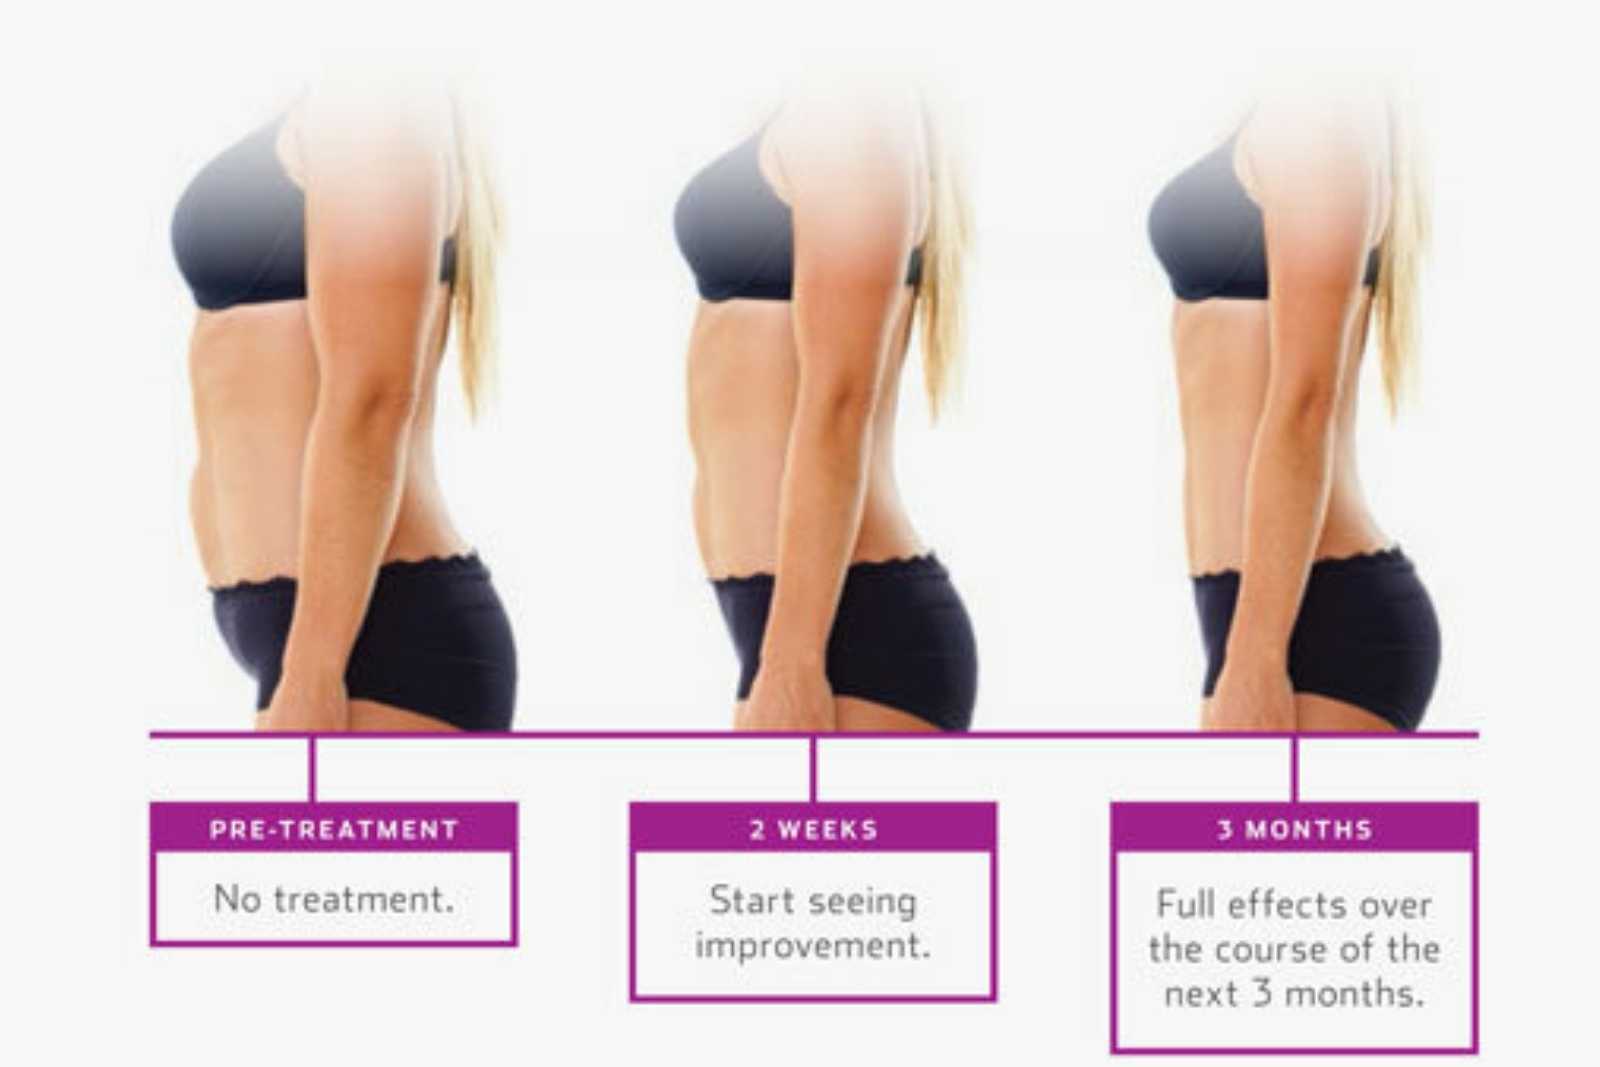 How to build wow! body contouring treatment plans - Body